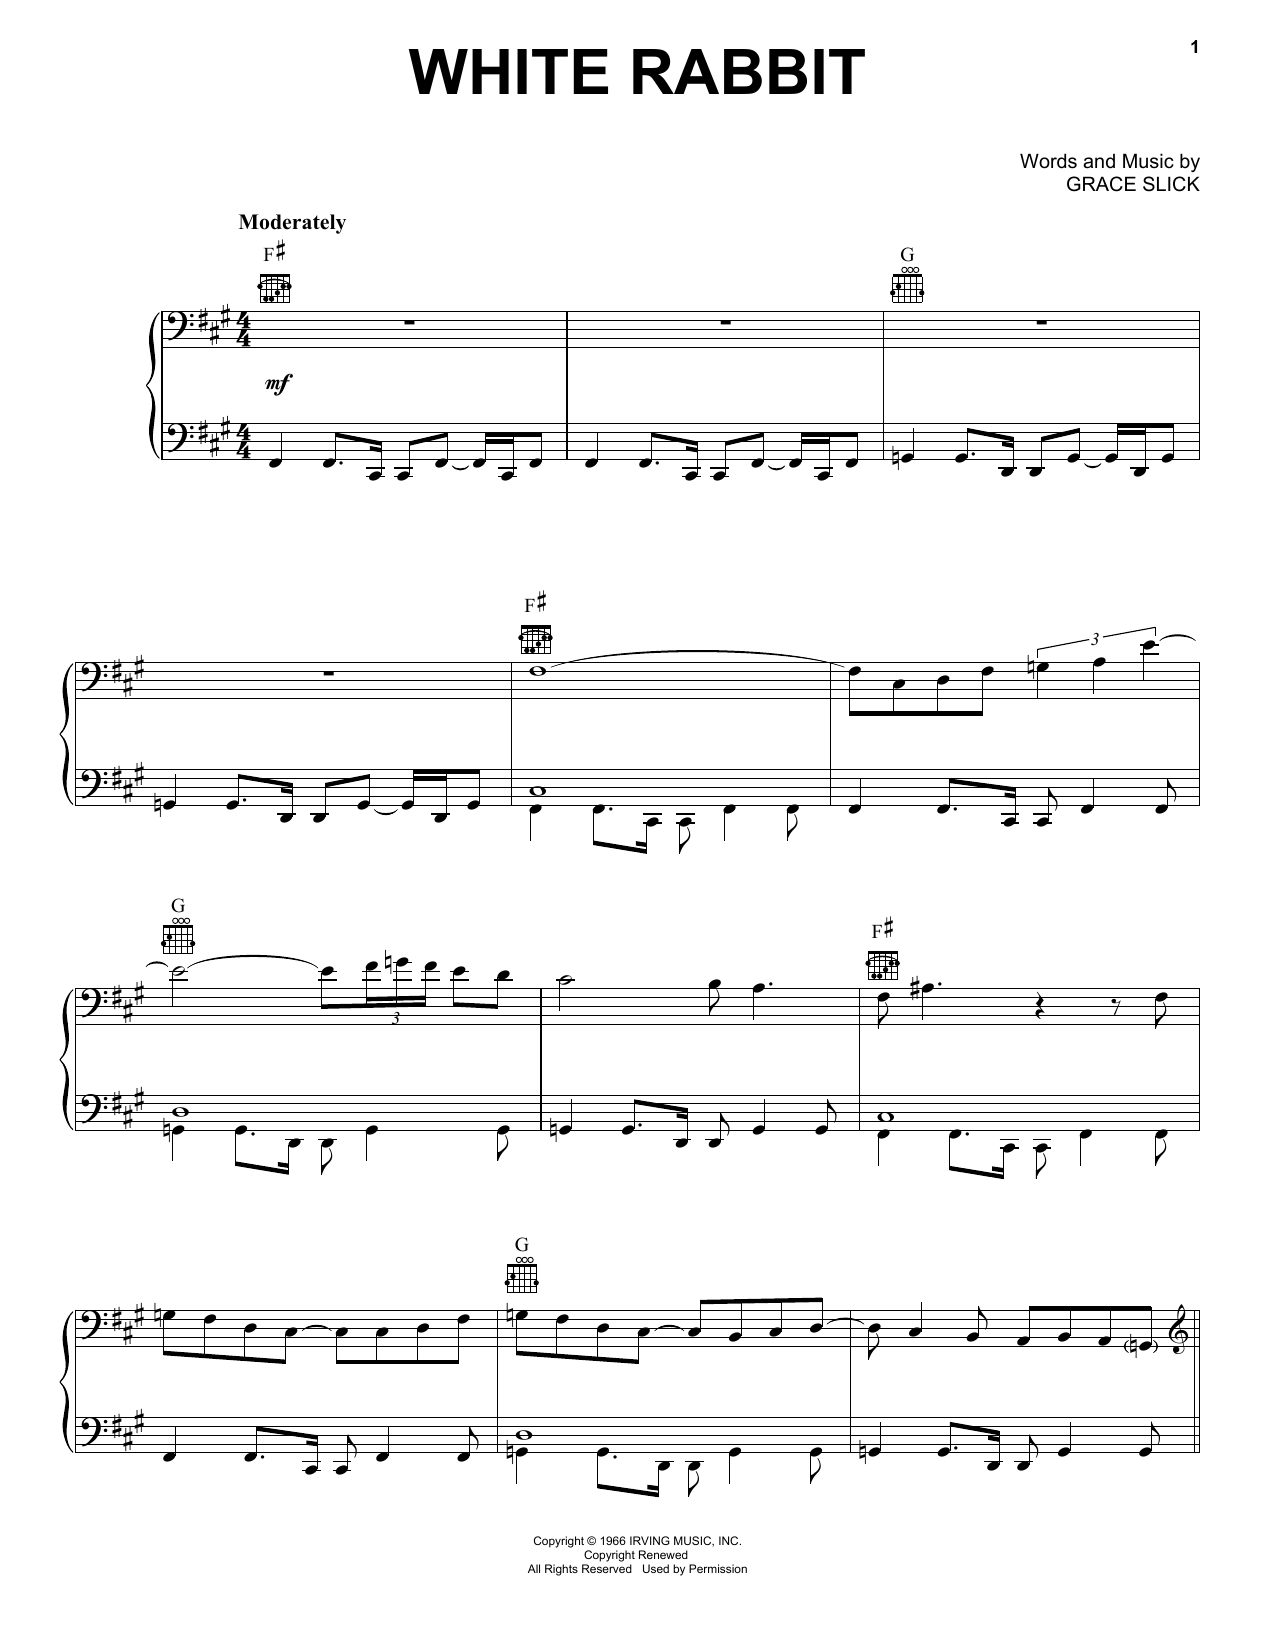 Jefferson Airplane White Rabbit sheet music notes and chords. Download Printable PDF.